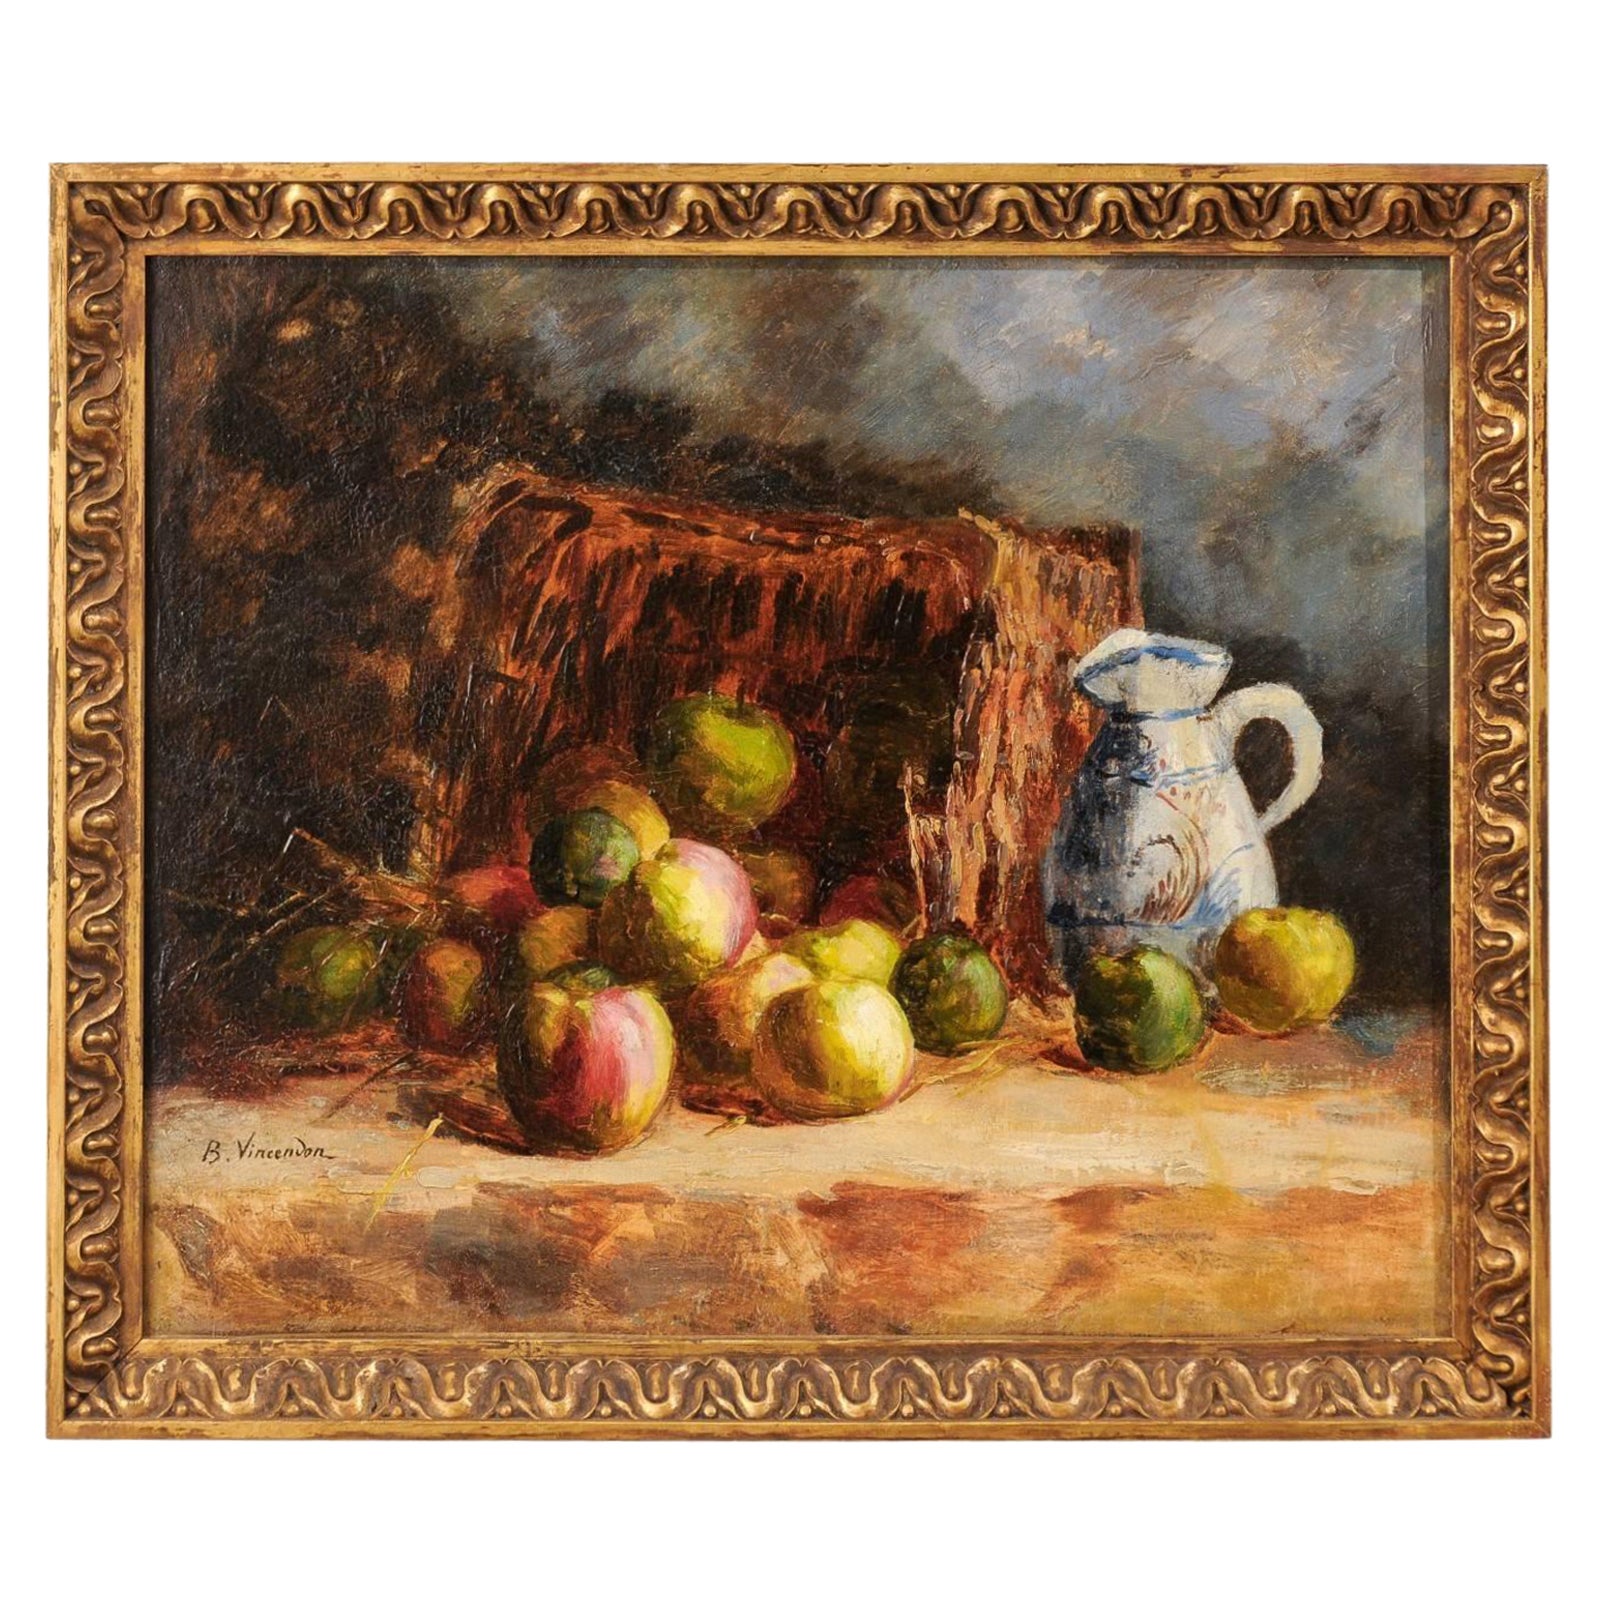 French Framed Impressionist Style Oil Still Life Painting by Berthe Vincendon